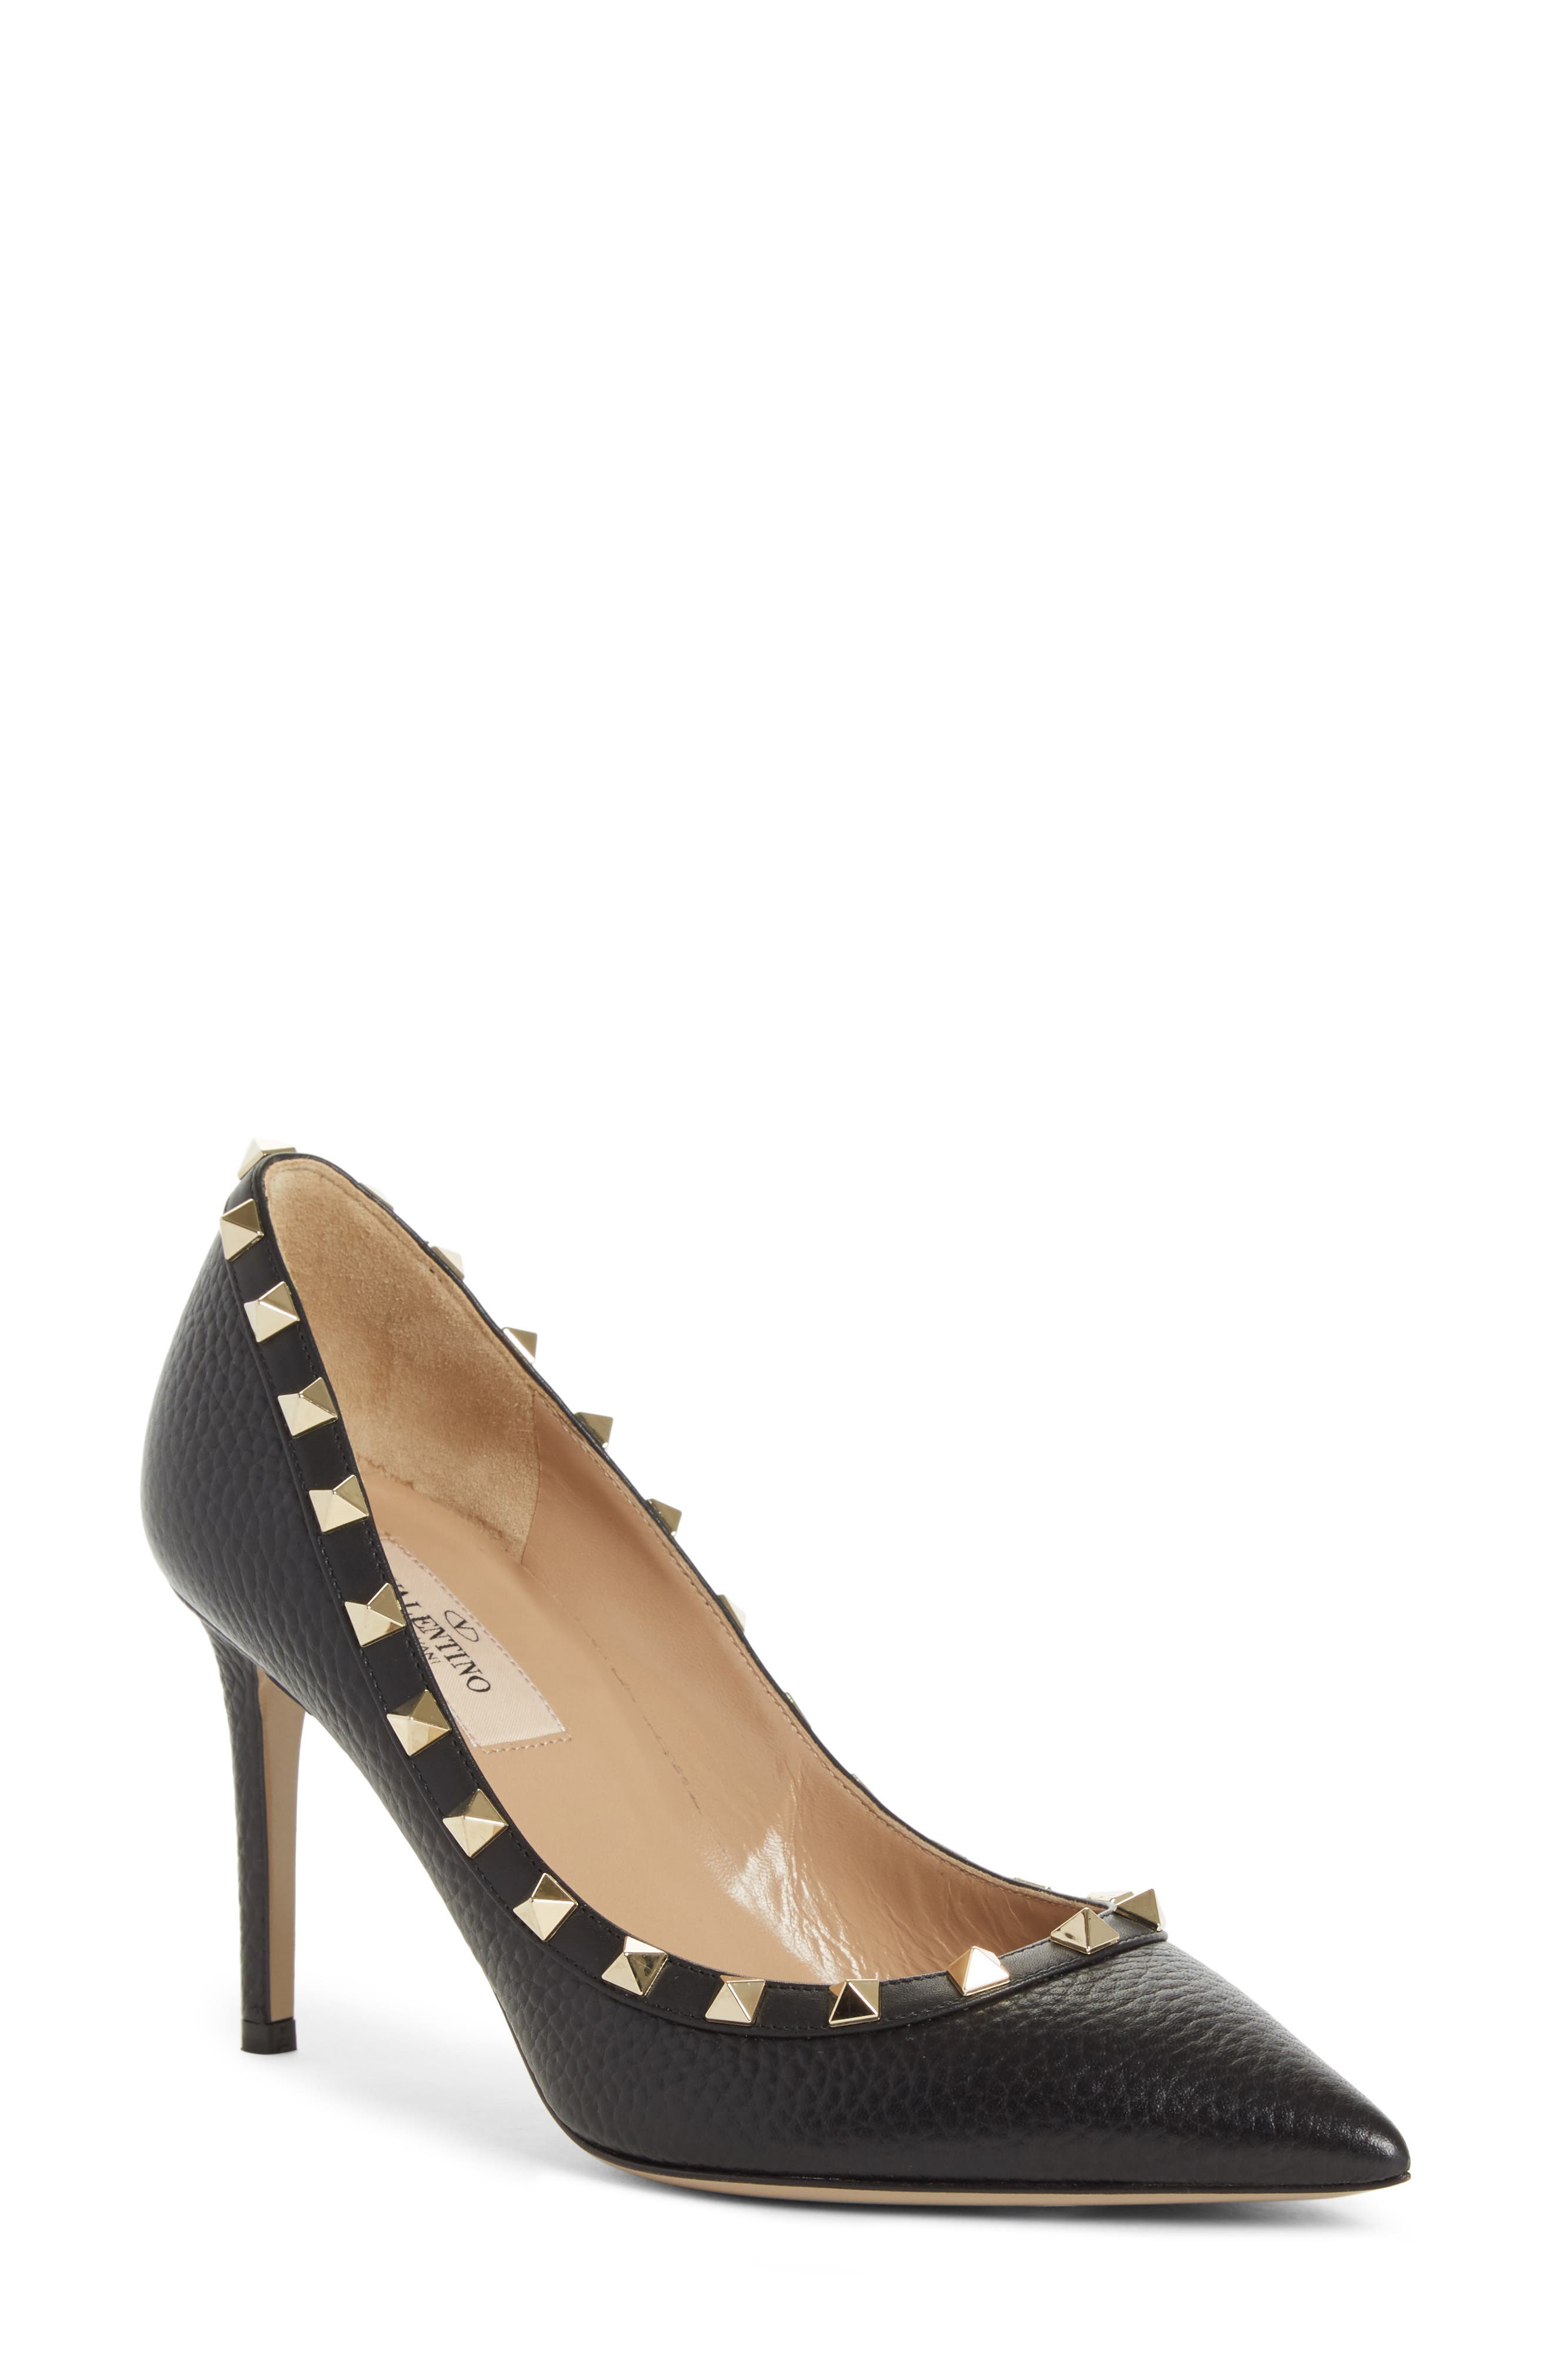 valentino high heels shoes